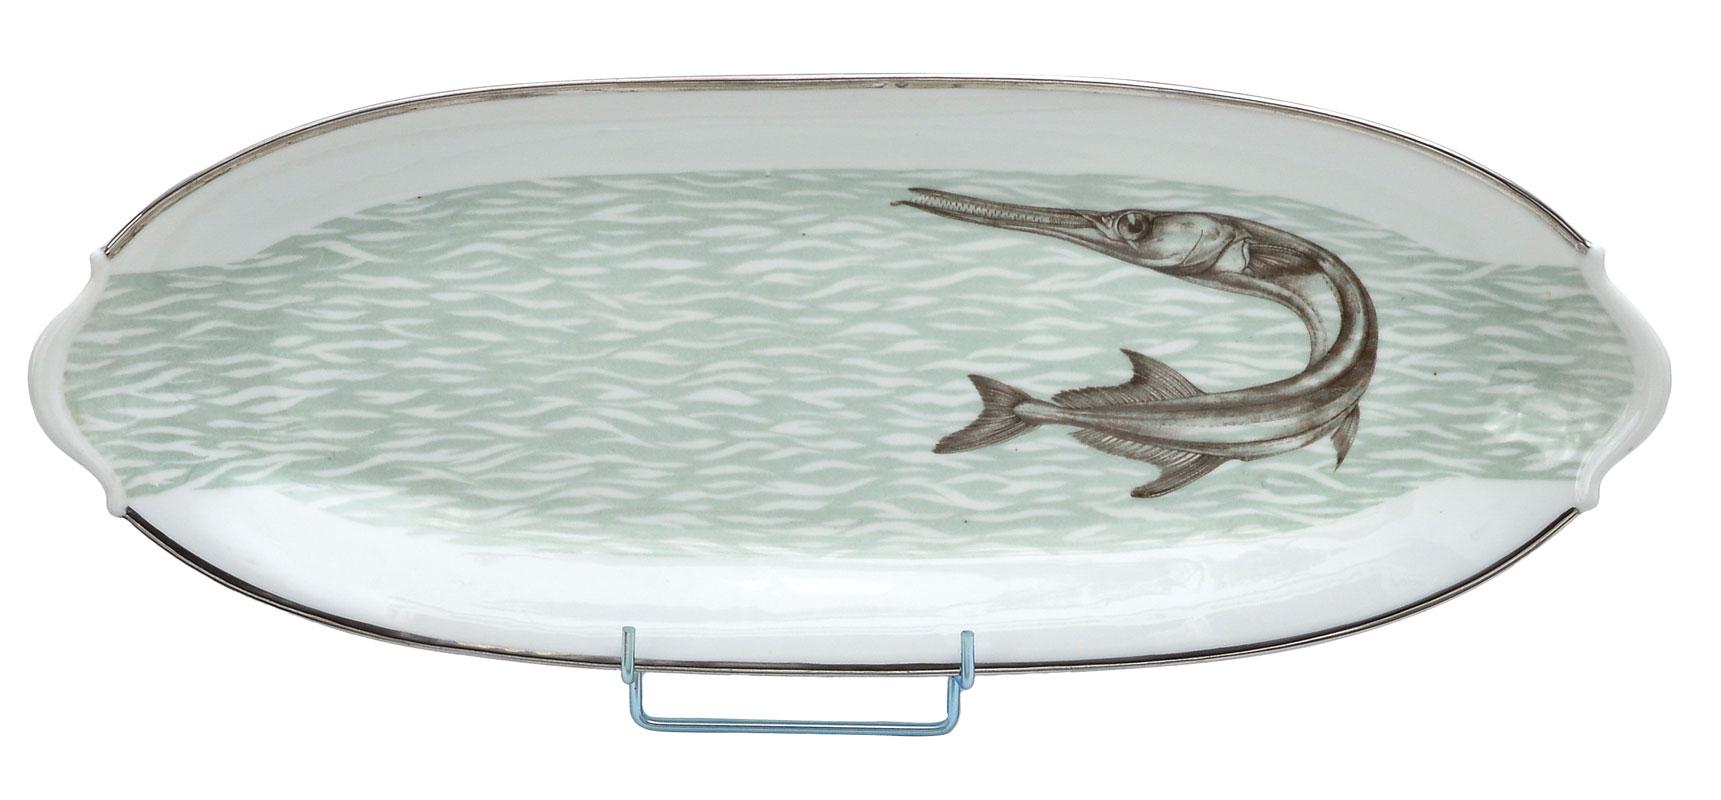 French Art Deco style Fish Service for 12 People by Bernardaud Limoges  c. 1970 For Sale